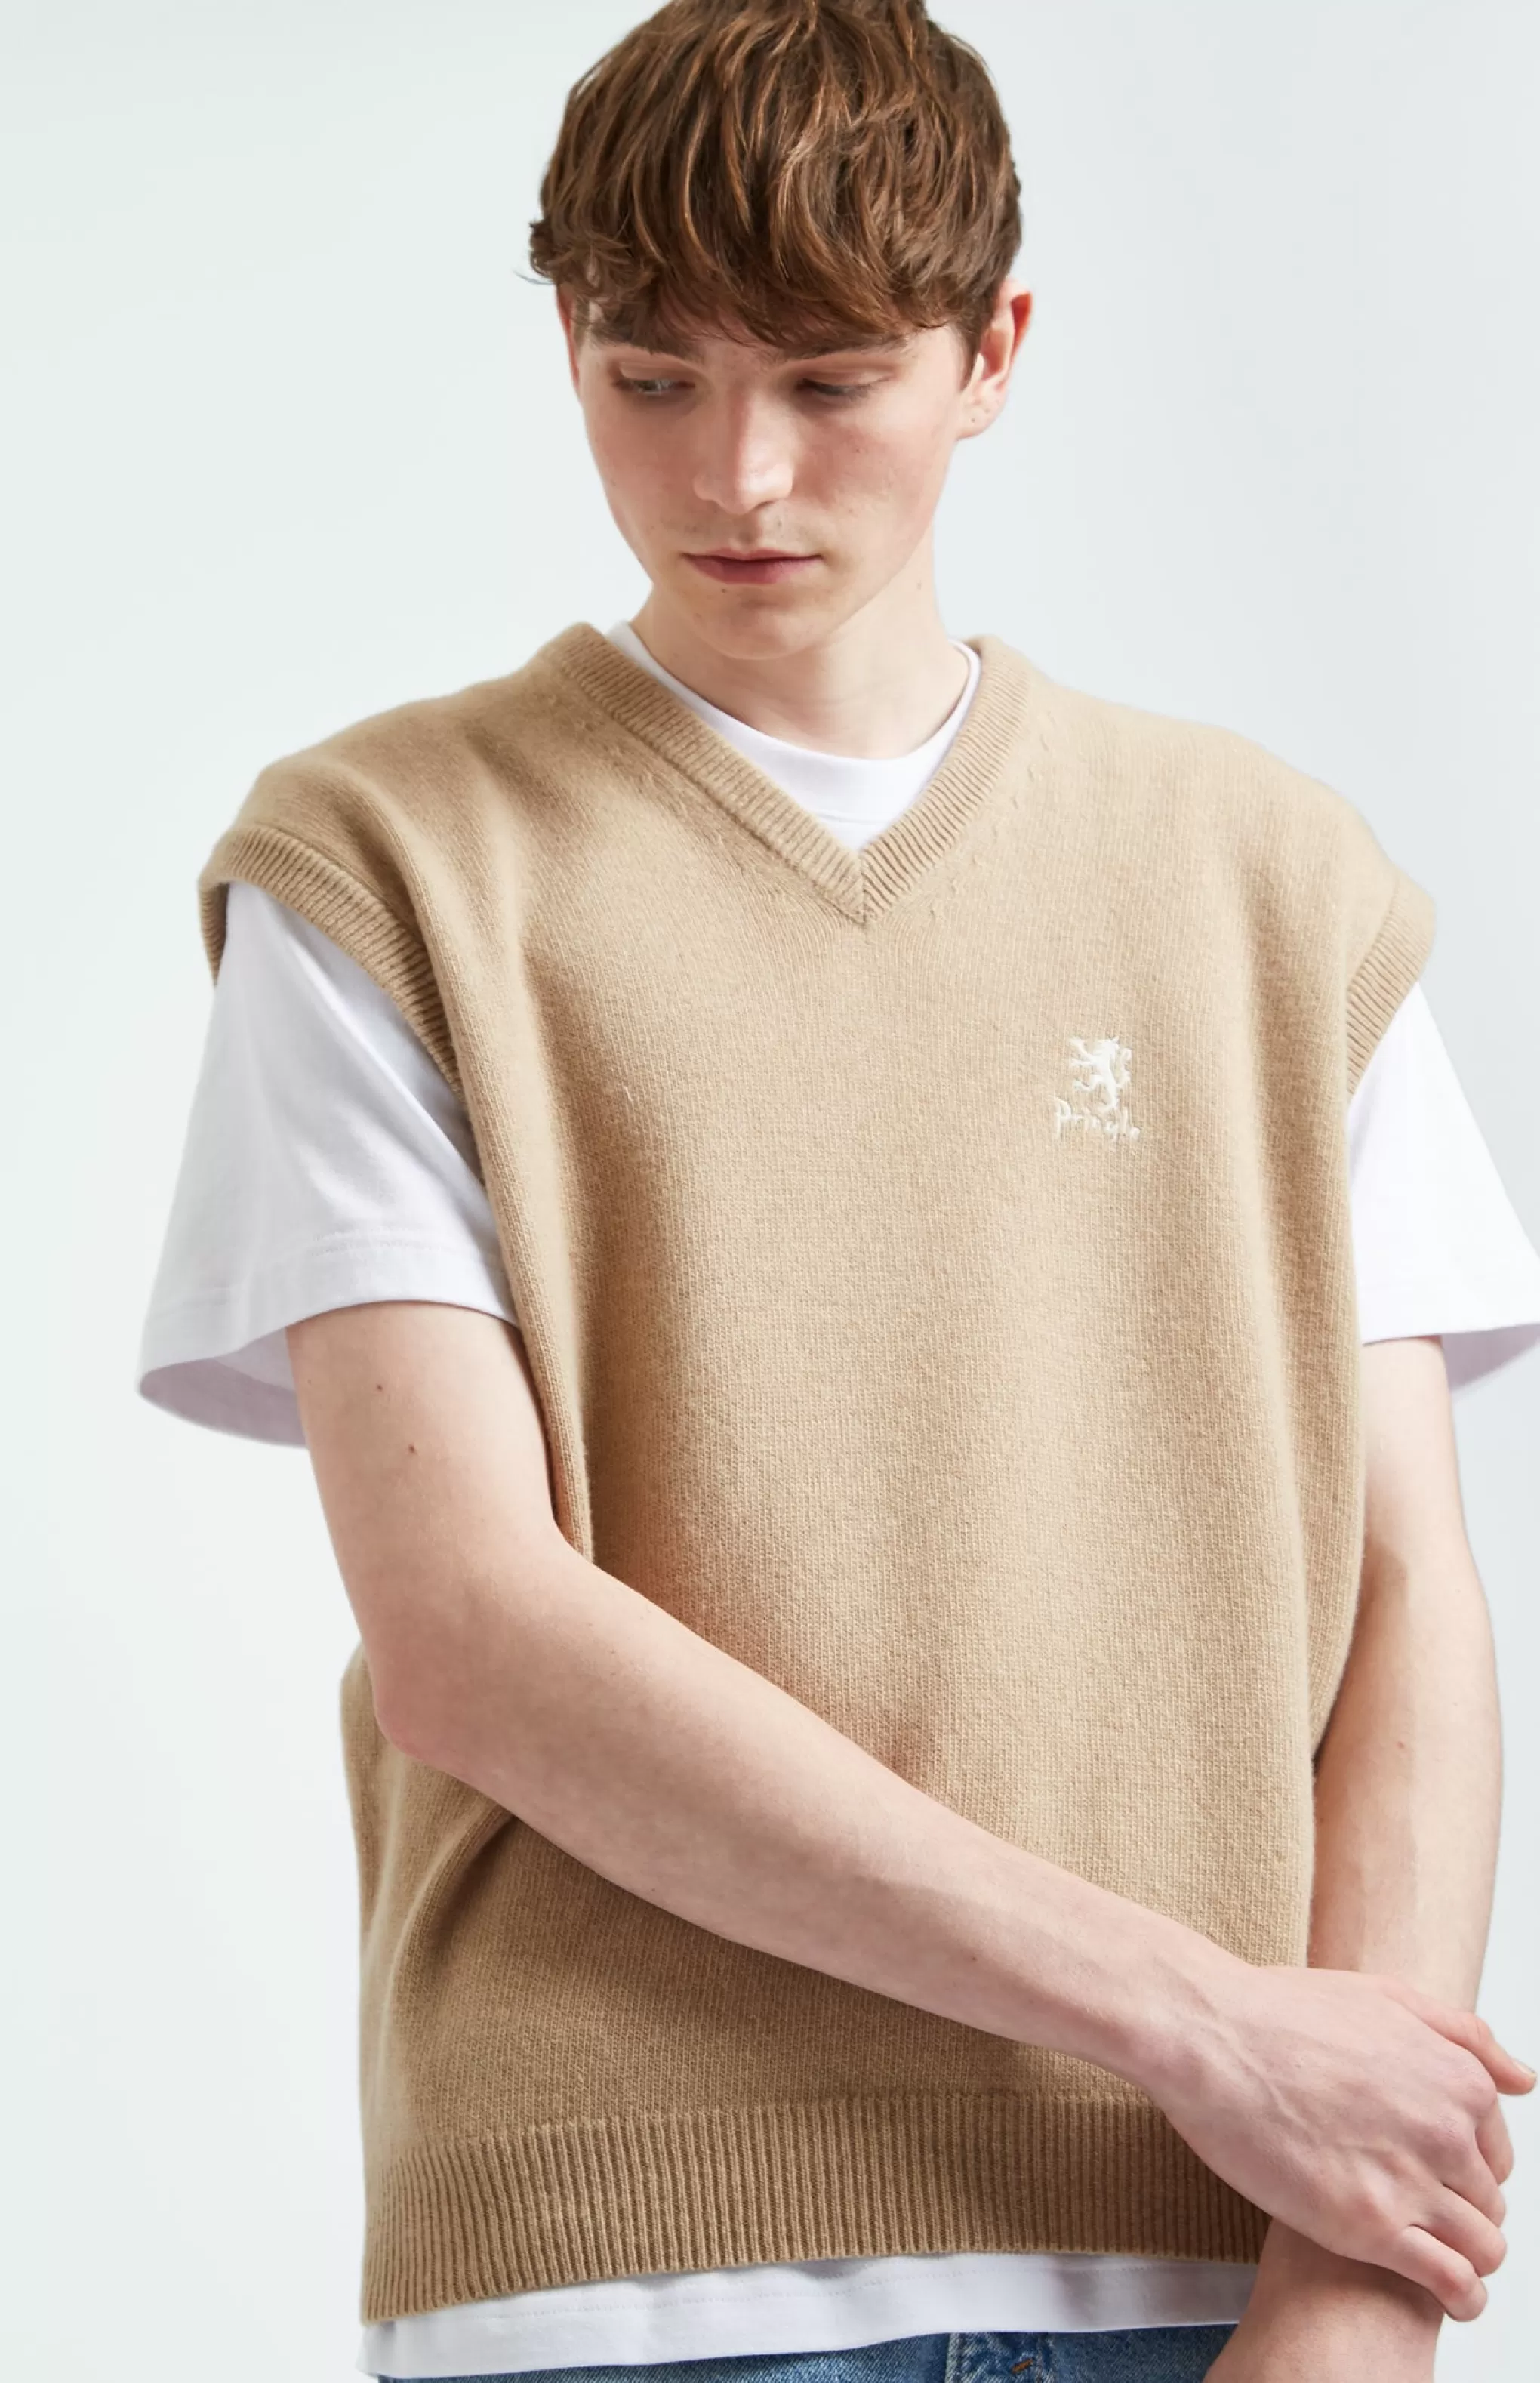 Cheap V Neck Sleeveless Jumper In Camel With Contrasting Lion Logo Men Pringle Heritage Unisex Collections